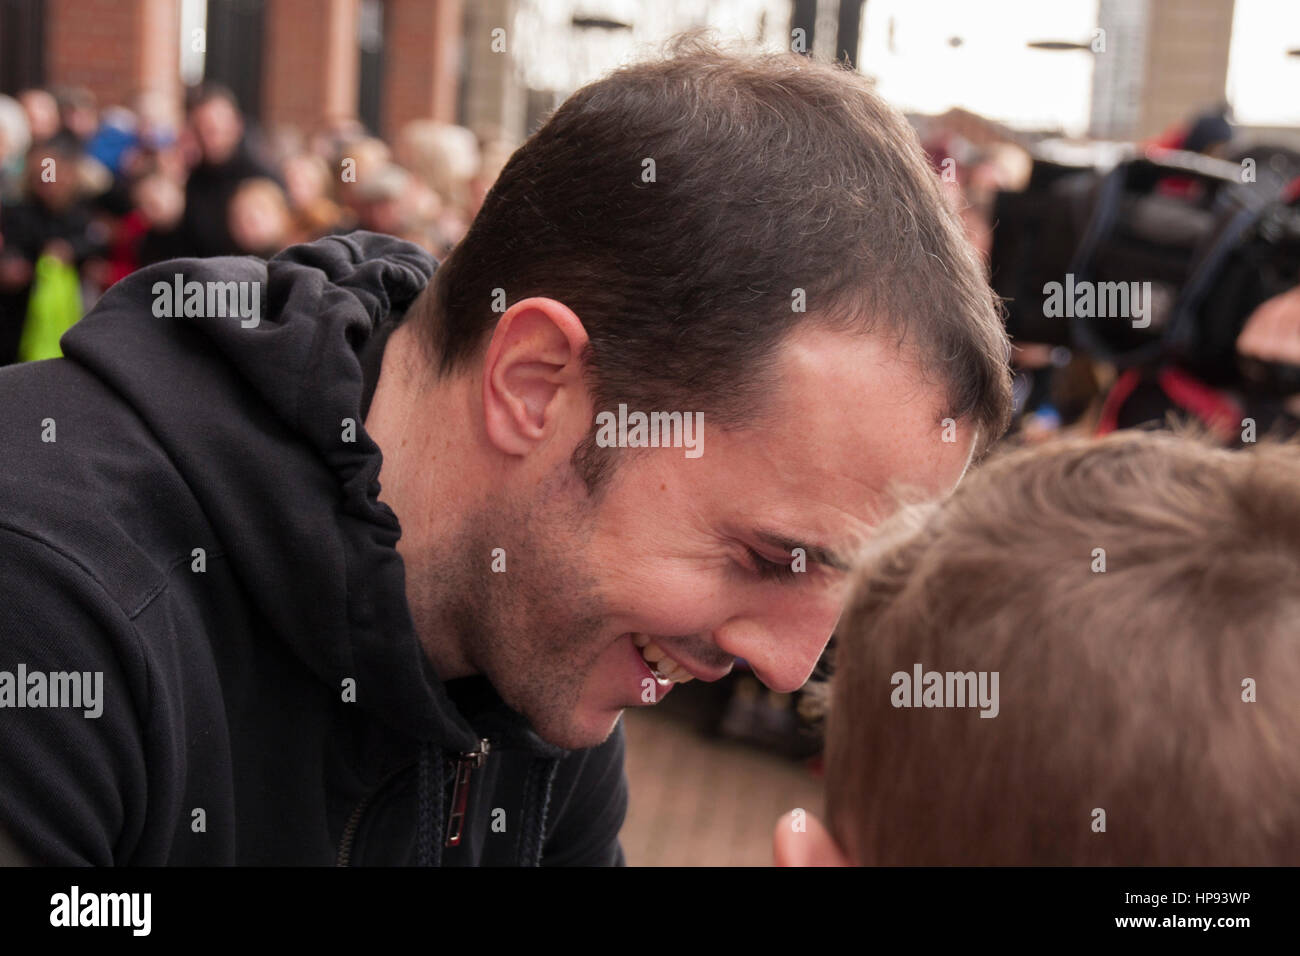 Stadium of Light,Sunderland,UK.20th February 2017.Sunderland footballers,John O'Shea signs autographs for fans prior to the open training session today.David Dixon/Alamy Live News Stock Photo